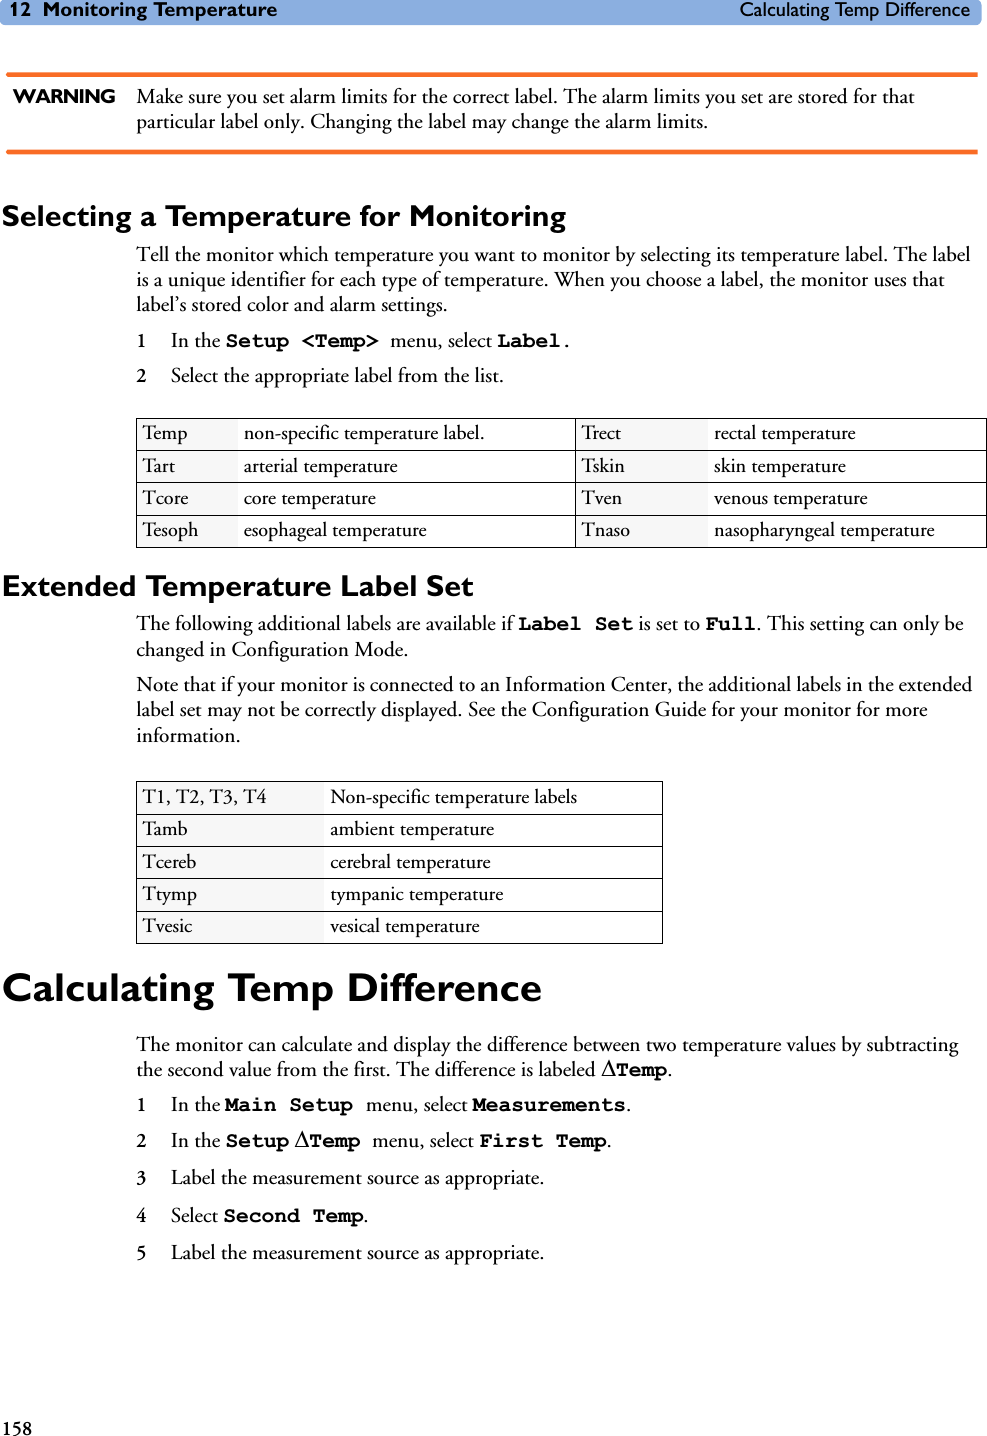 12 Monitoring Temperature Calculating Temp Difference158WARNING Make sure you set alarm limits for the correct label. The alarm limits you set are stored for that particular label only. Changing the label may change the alarm limits.Selecting a Temperature for MonitoringTell the monitor which temperature you want to monitor by selecting its temperature label. The label is a unique identifier for each type of temperature. When you choose a label, the monitor uses that label’s stored color and alarm settings.1In the Setup &lt;Temp&gt; menu, select Label.2Select the appropriate label from the list.Extended Temperature Label Set The following additional labels are available if Label Set is set to Full. This setting can only be changed in Configuration Mode. Note that if your monitor is connected to an Information Center, the additional labels in the extended label set may not be correctly displayed. See the Configuration Guide for your monitor for more information. Calculating Temp DifferenceThe monitor can calculate and display the difference between two temperature values by subtracting the second value from the first. The difference is labeled &apos;Temp. 1In the Main Setup menu, select Measurements.2In the Setup &apos;Temp menu, select First Temp.3Label the measurement source as appropriate.4Select Second Temp.5Label the measurement source as appropriate.Temp non-specific temperature label. Trect rectal temperatureTart arterial temperature Tskin skin temperatureTcore core temperature Tven venous temperatureTesoph esophageal temperature Tnaso nasopharyngeal temperatureT1, T2, T3, T4 Non-specific temperature labelsTamb ambient temperatureTcereb cerebral temperatureTtymp tympanic temperatureTvesic vesical temperature